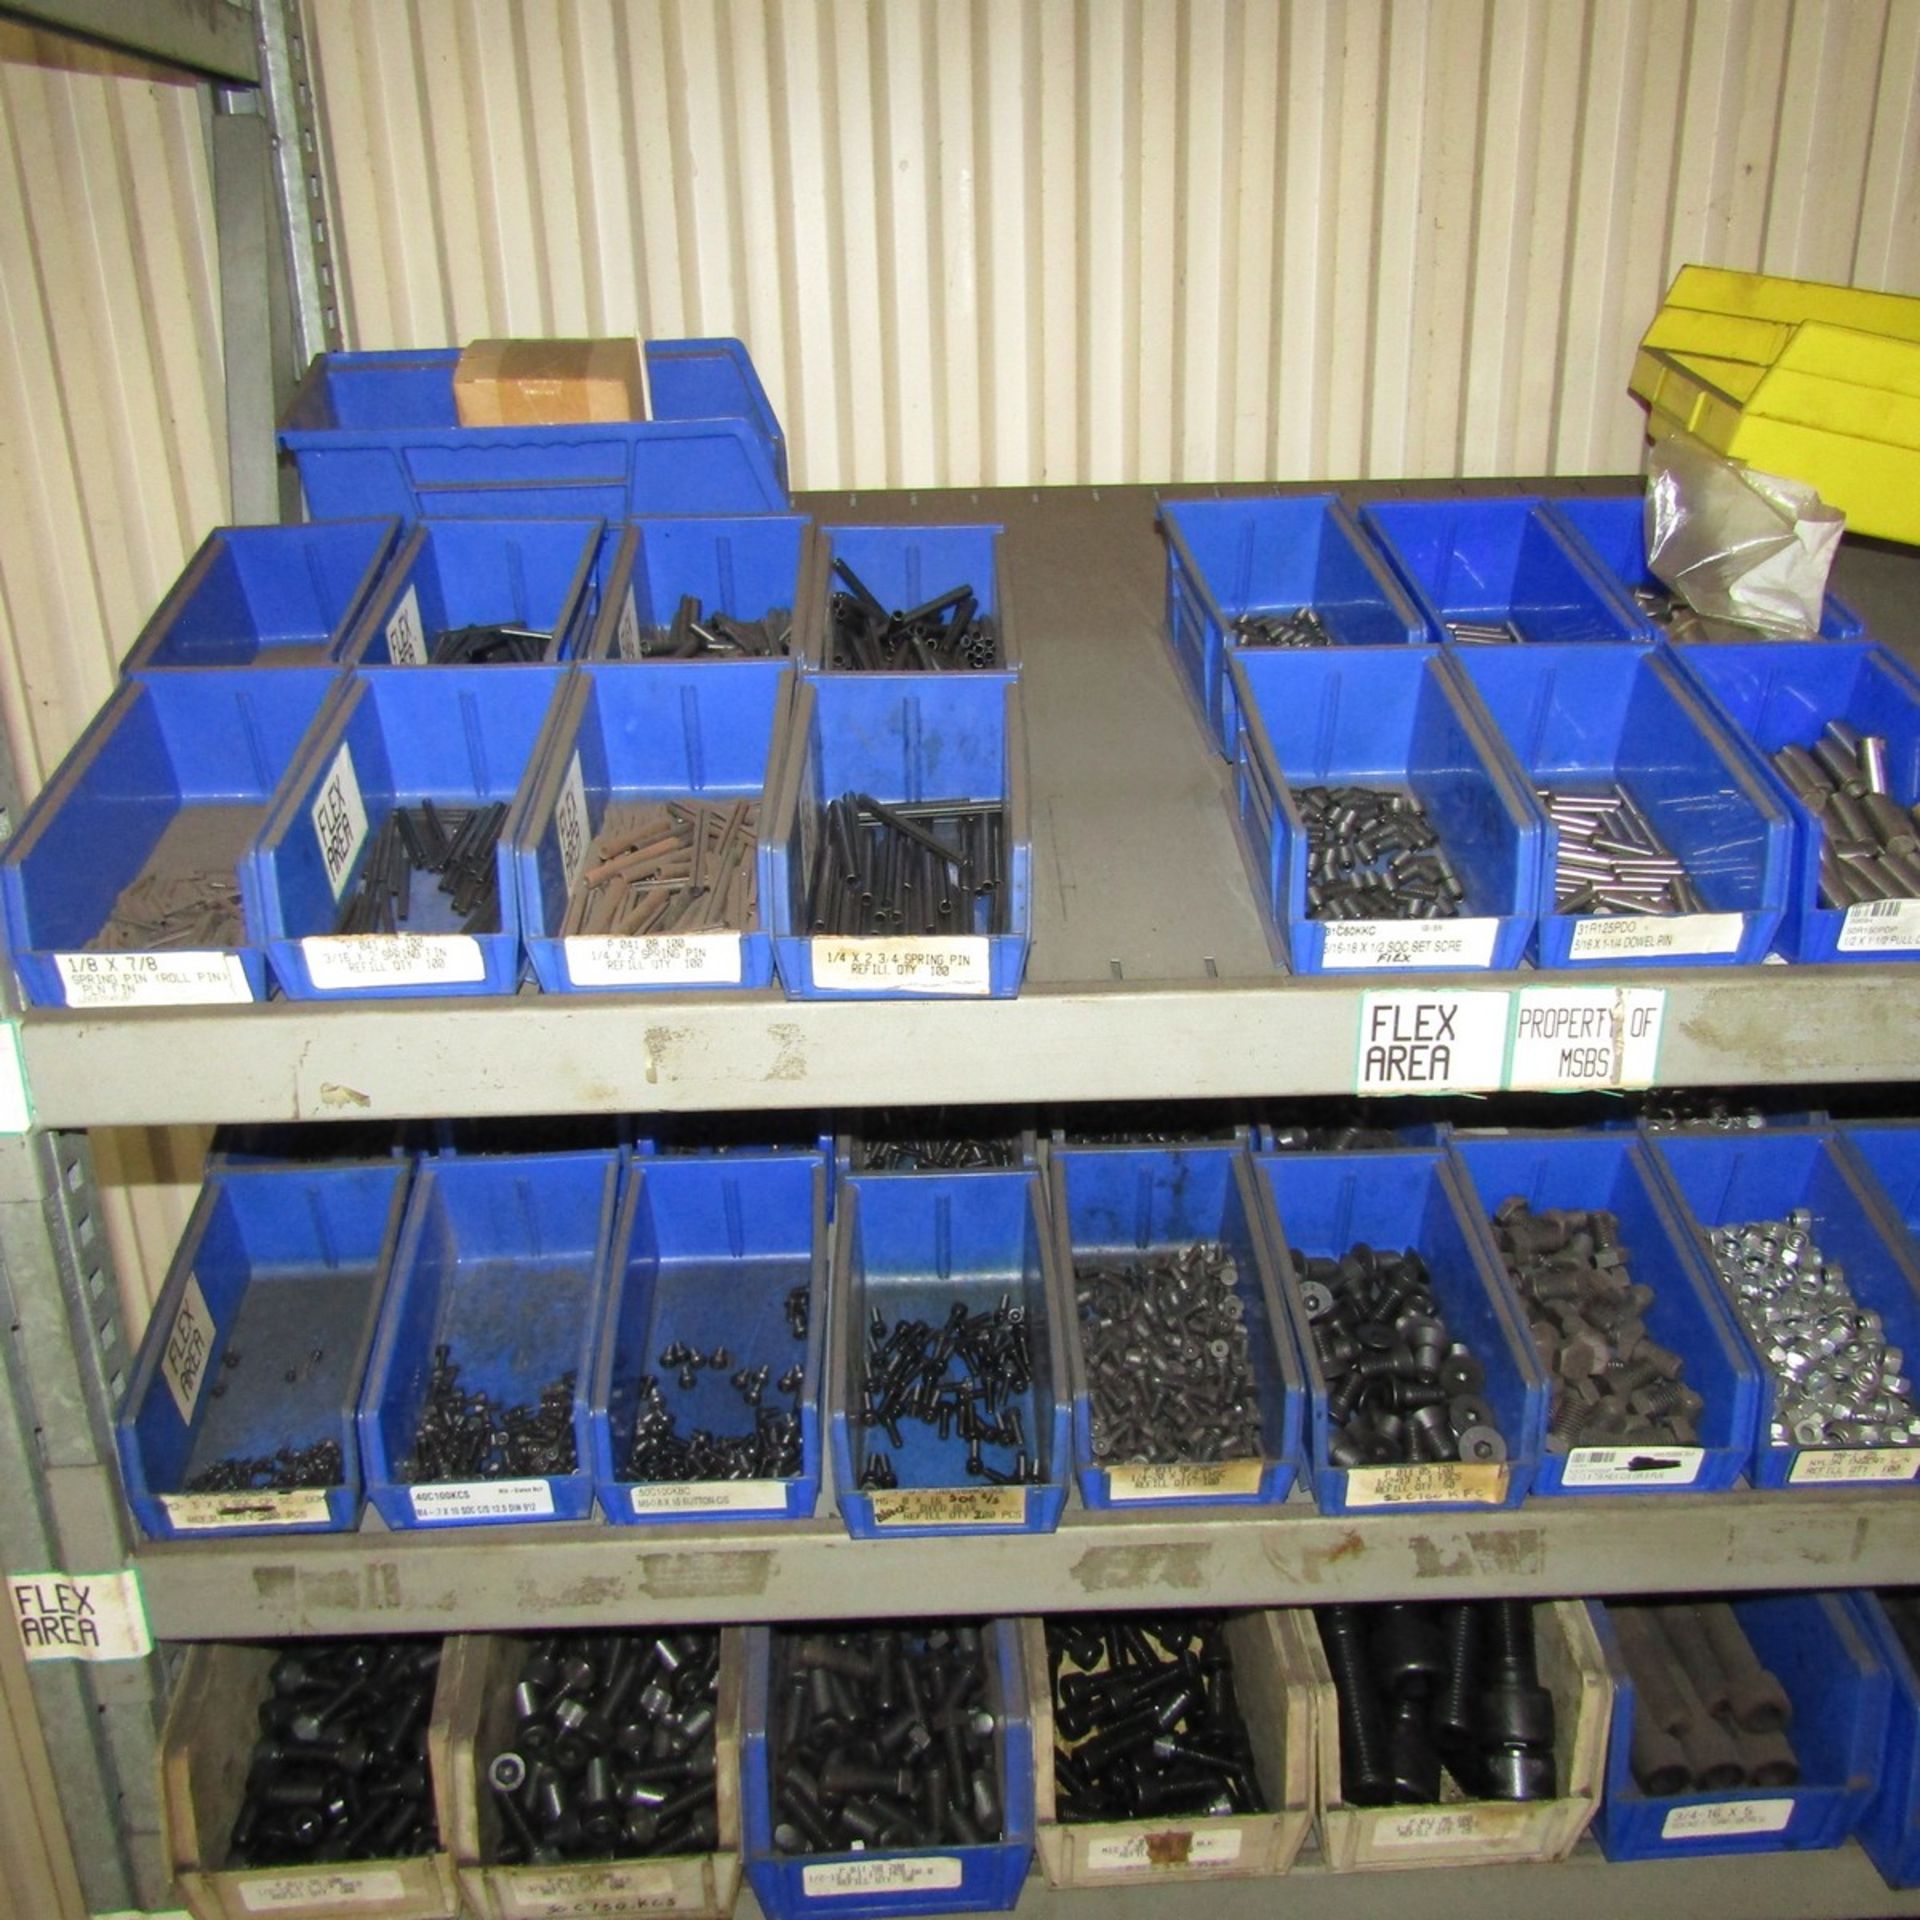 5-Tier Shelving Unit with Assorted Nuts and Bolts - Image 4 of 4